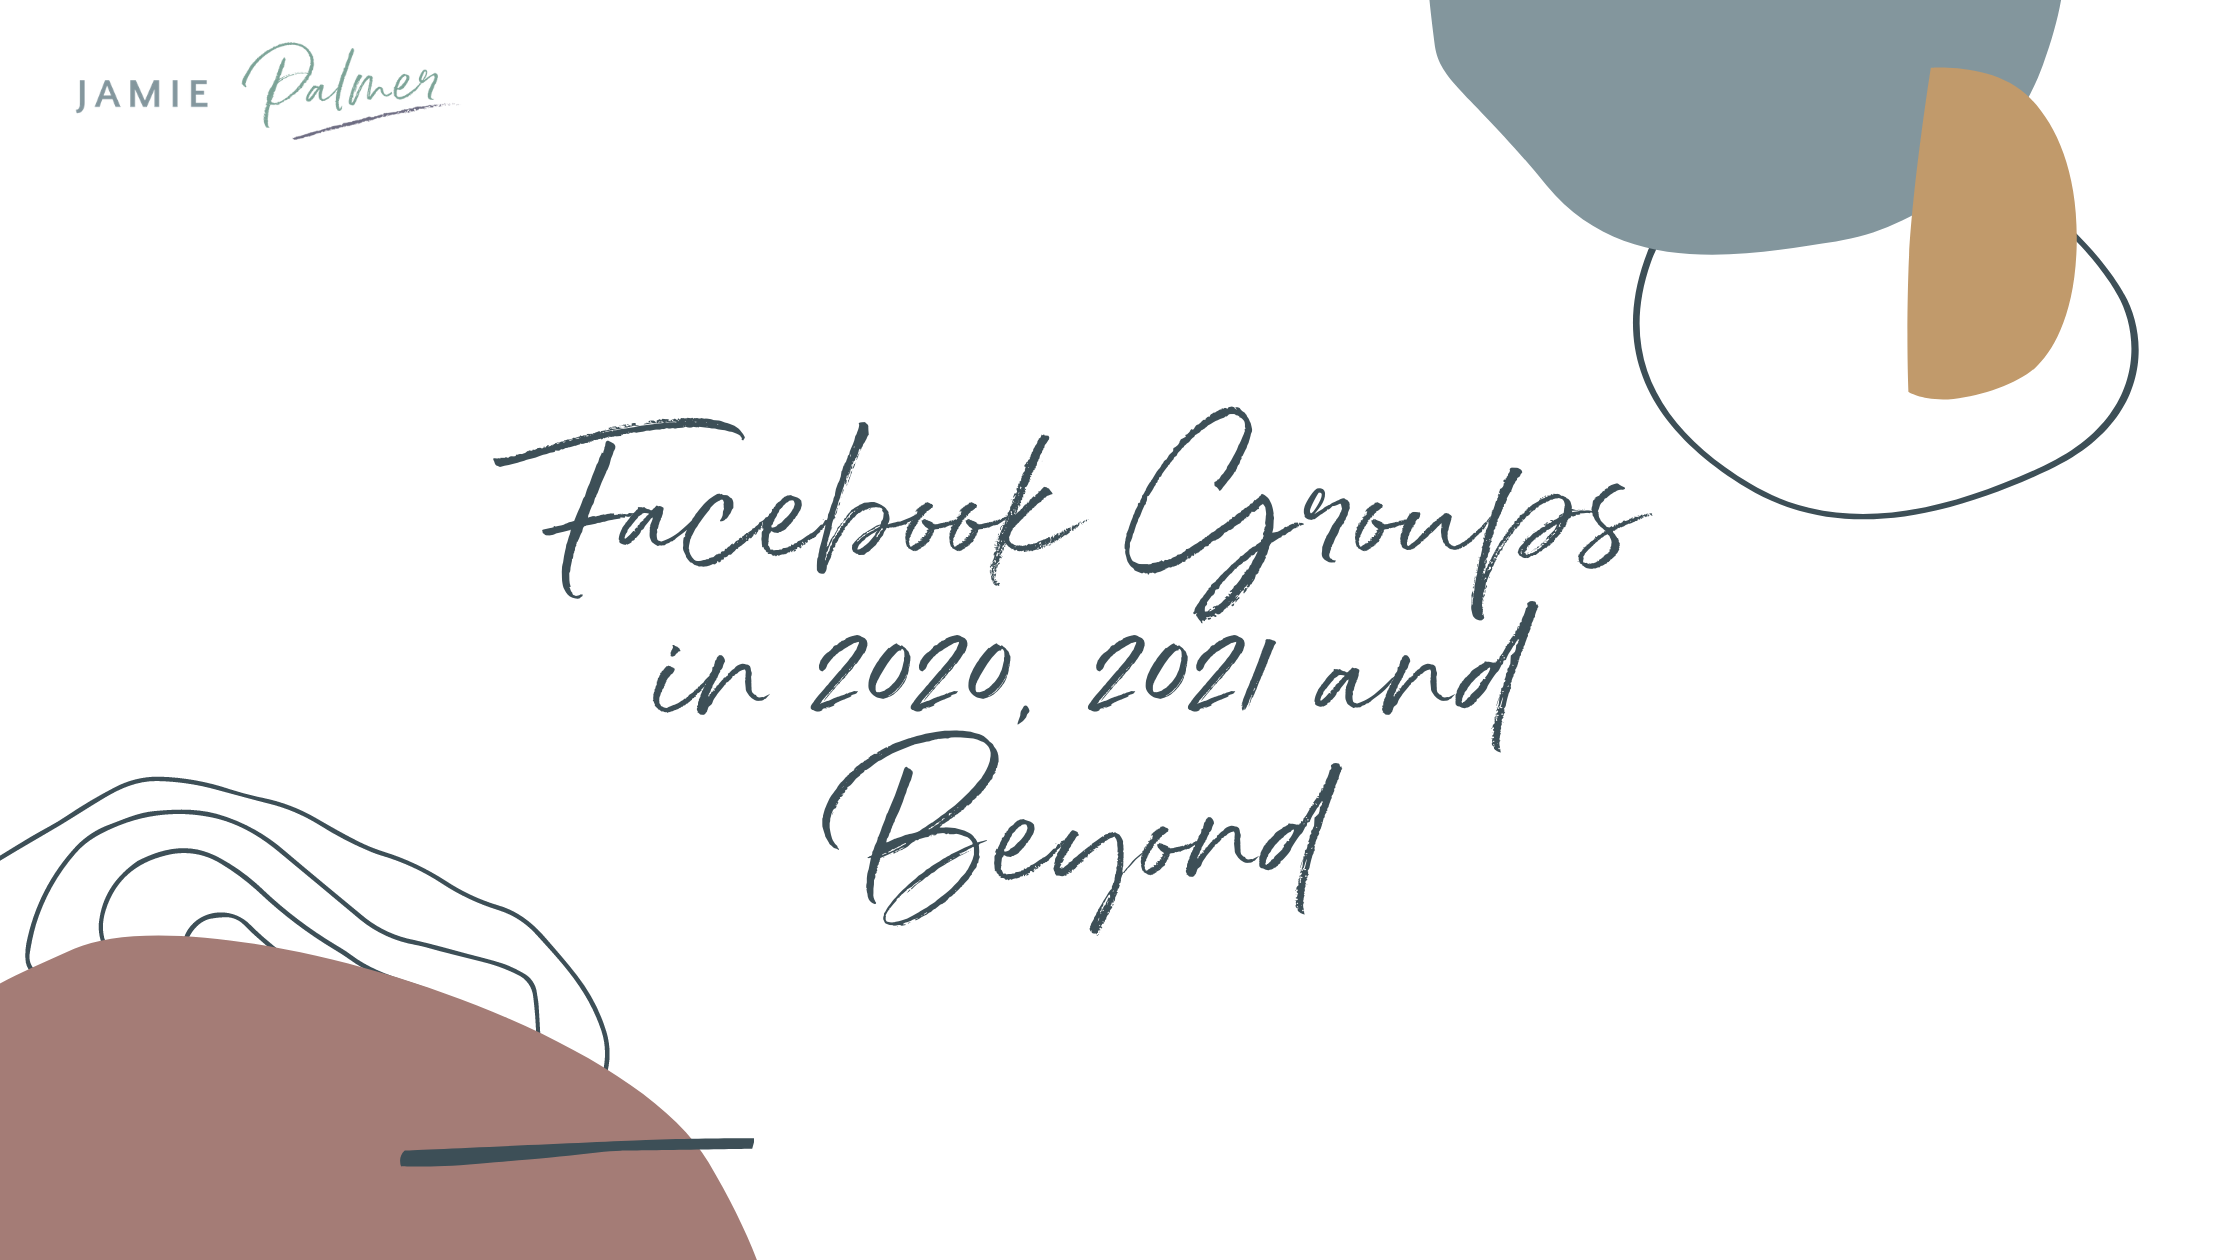 Facebook groups in 2020, 2021 and beyond